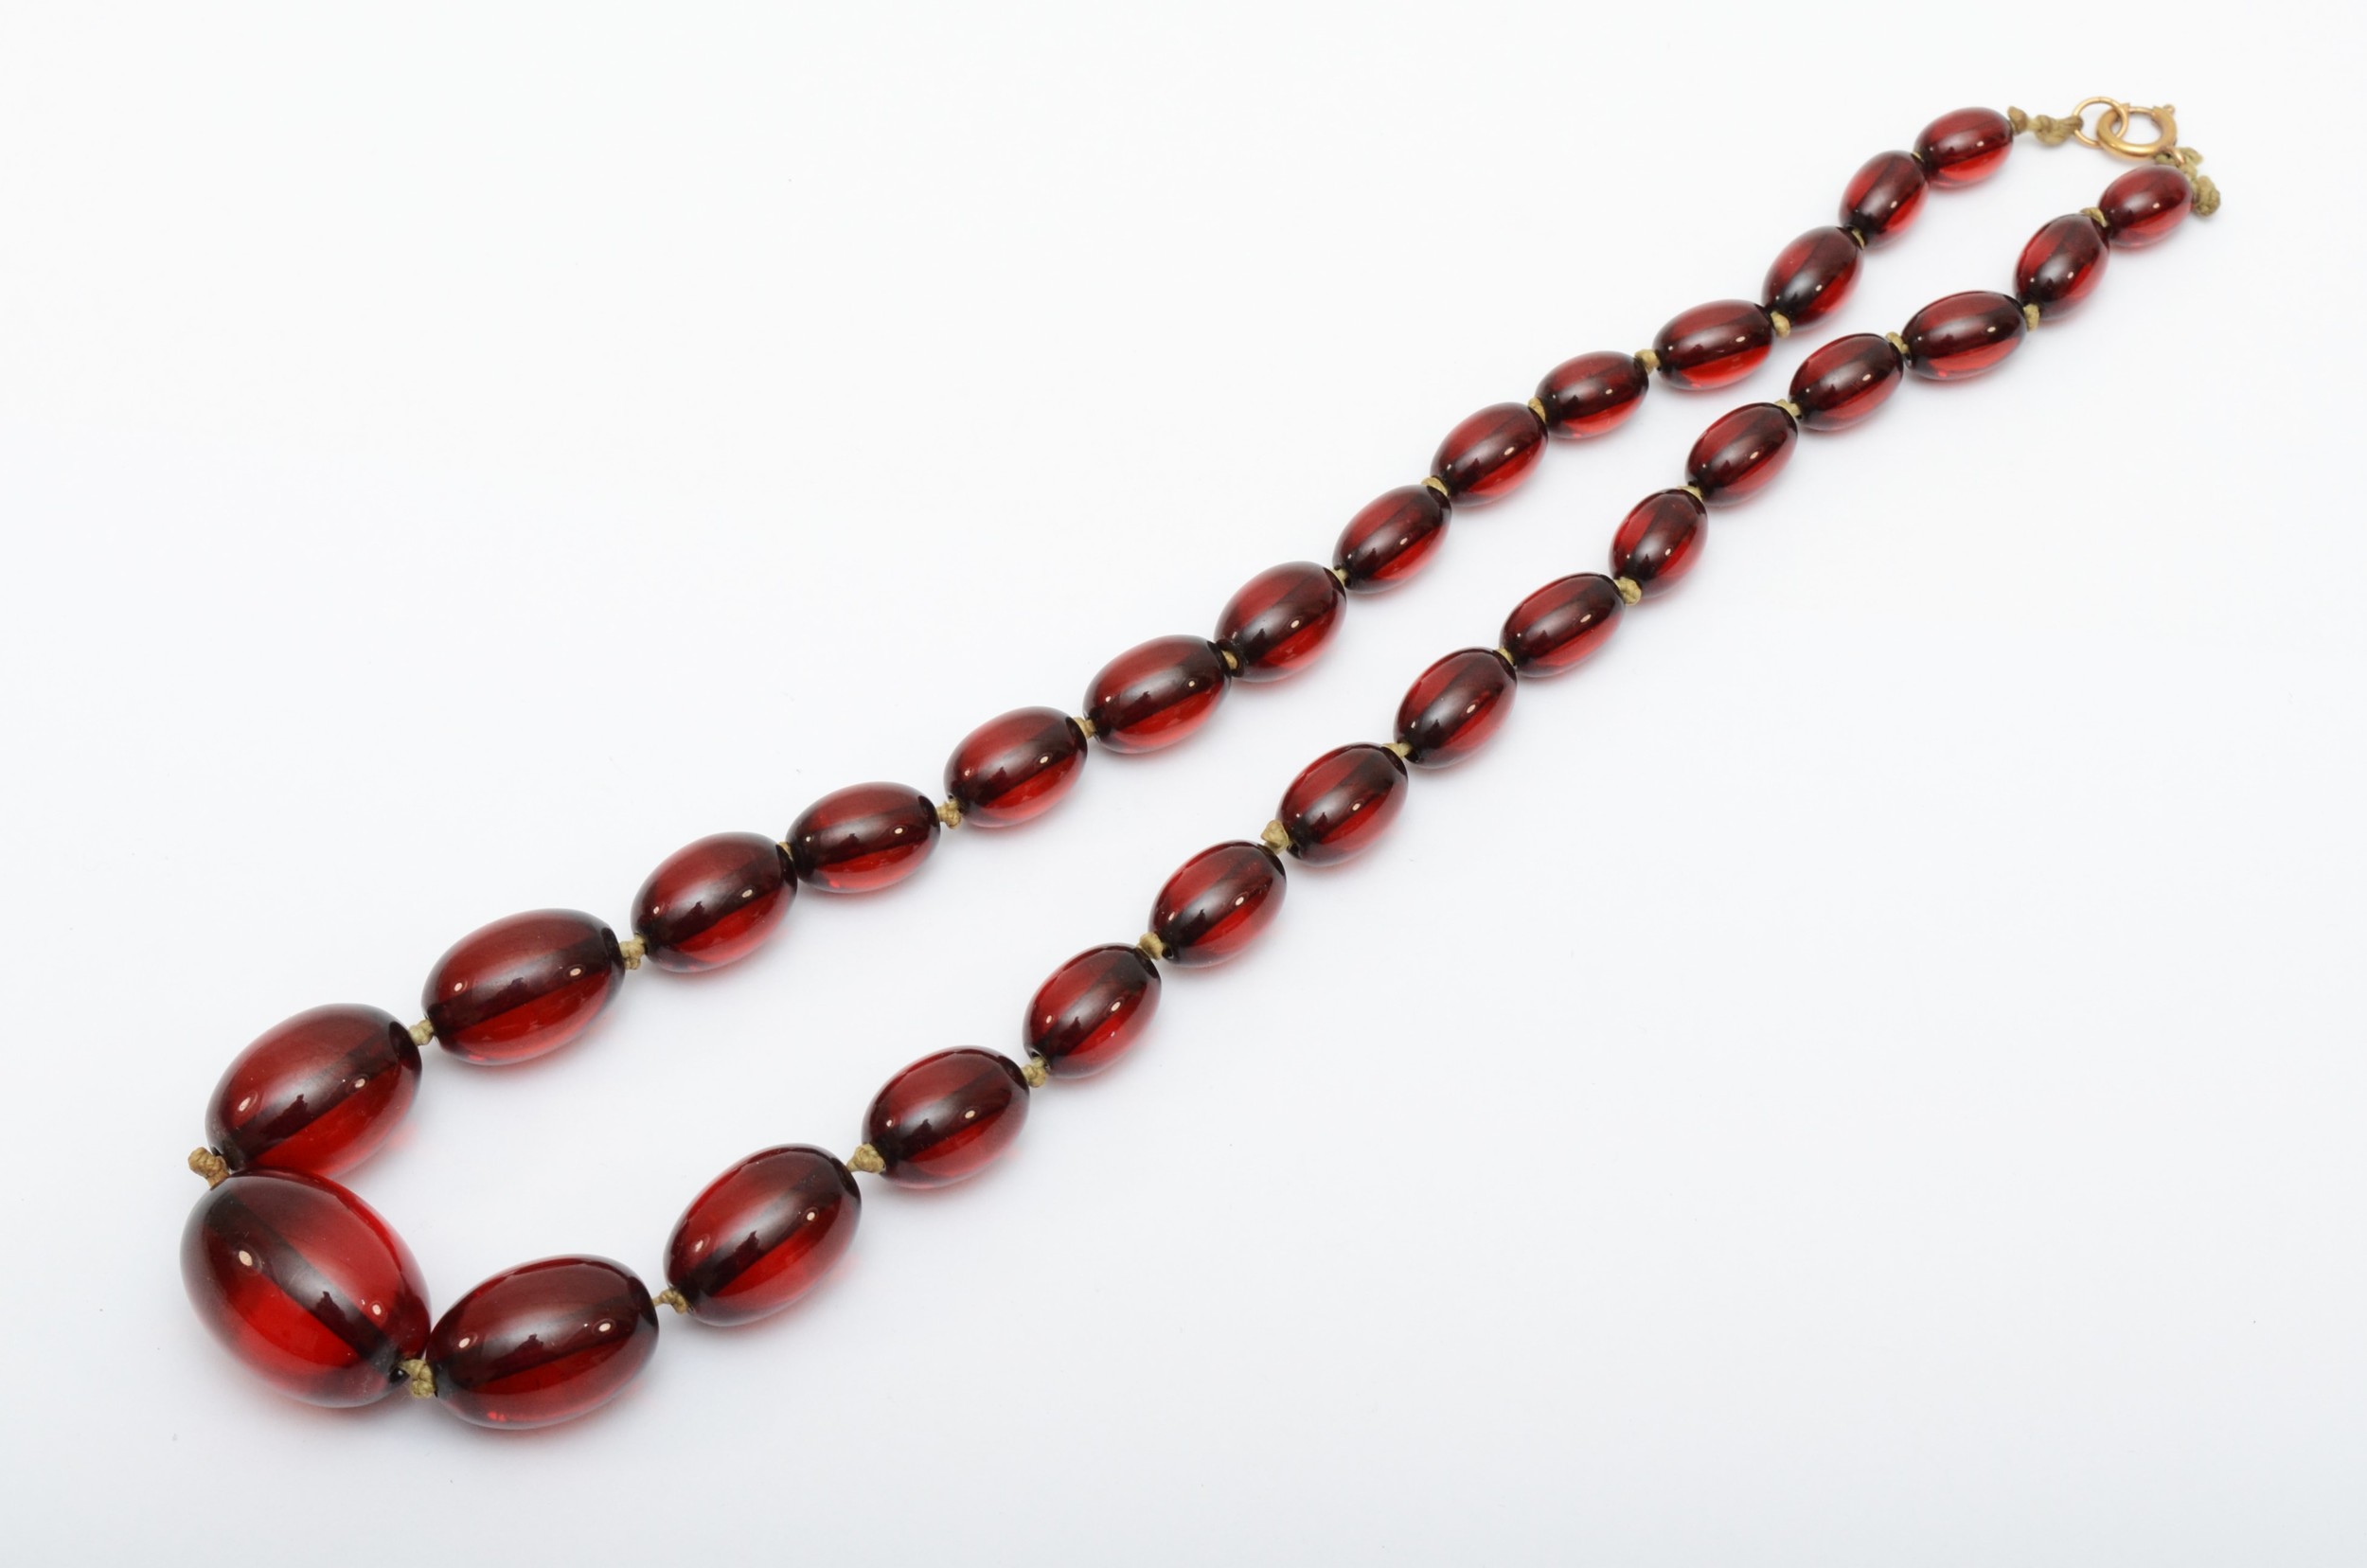 An amber Bakelite bead necklace, largest bead 28 x 20mm, 54gm